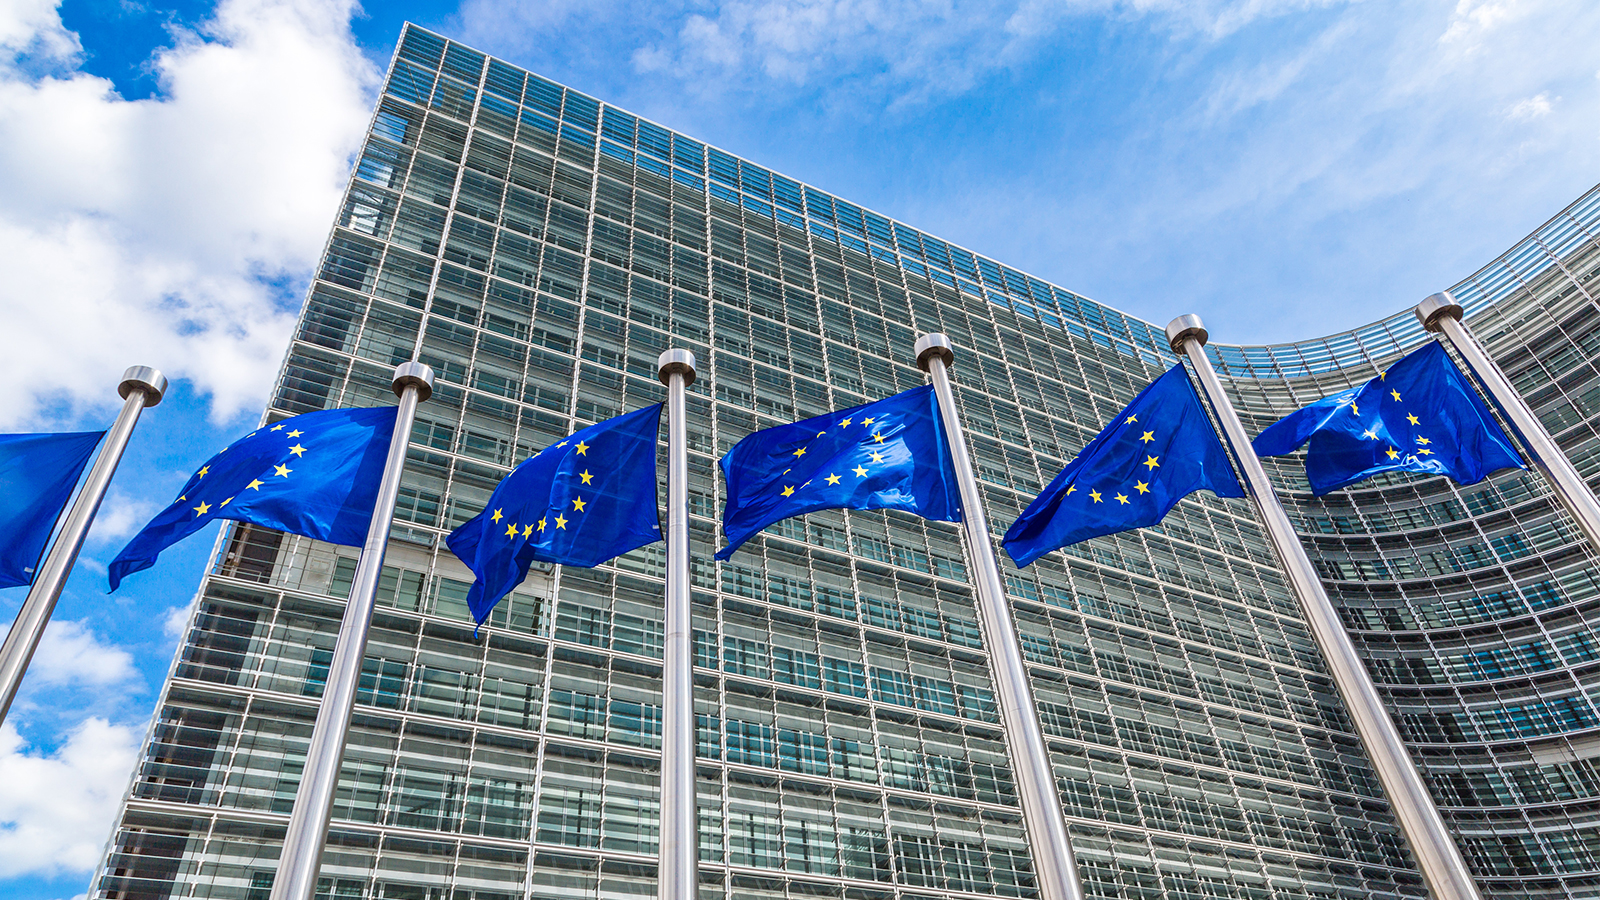 Eudamed changes along with medical device CE Marking regulations in Europe